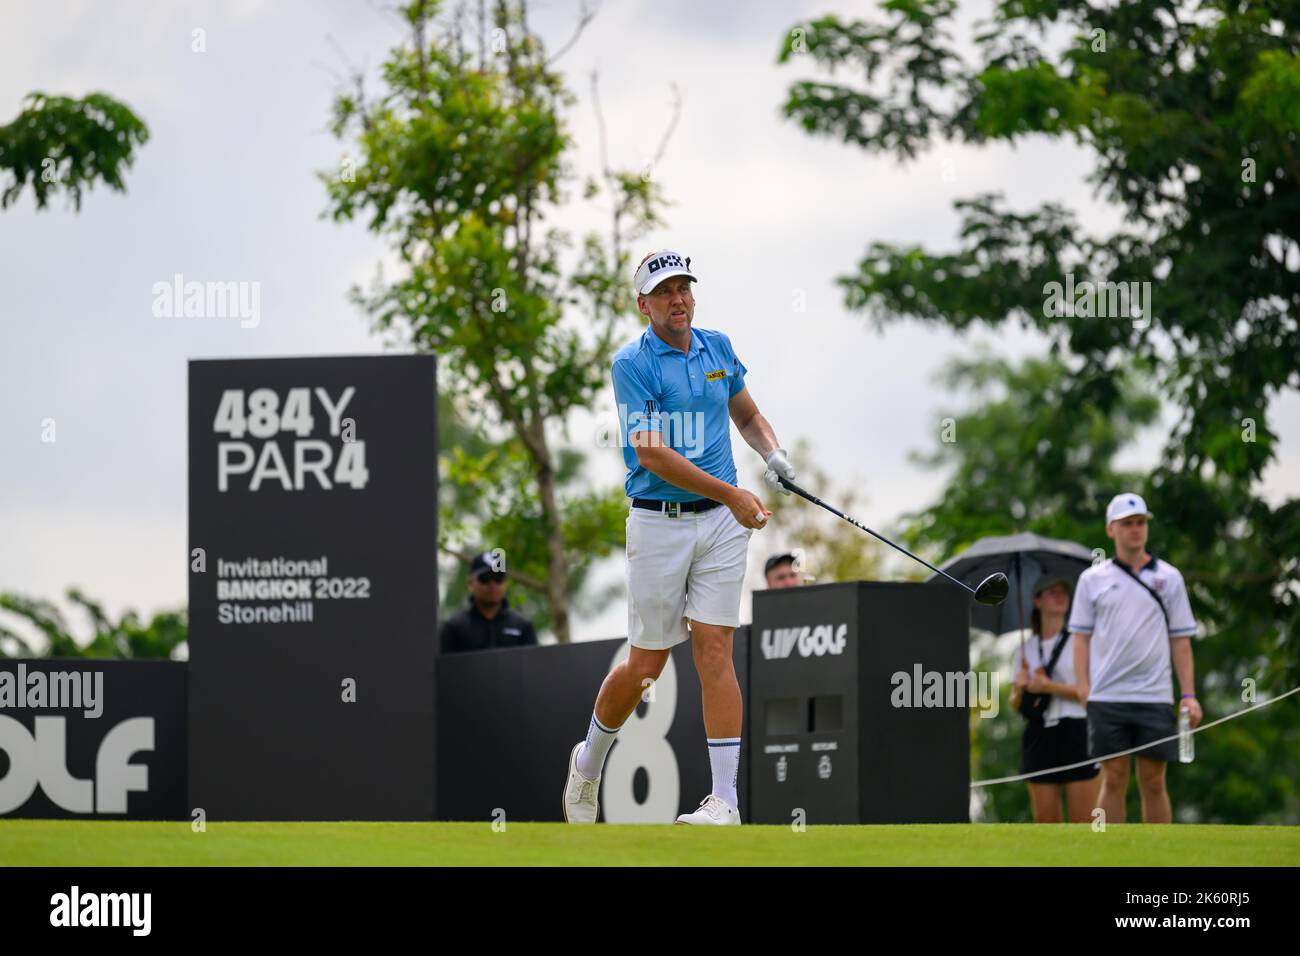 Ian Poulter of England tees off hole 8 during the final round of the LIV Golf Invitational Bangkok at Stonehill Golf Course in Bangkok, THAILAND Stock Photo